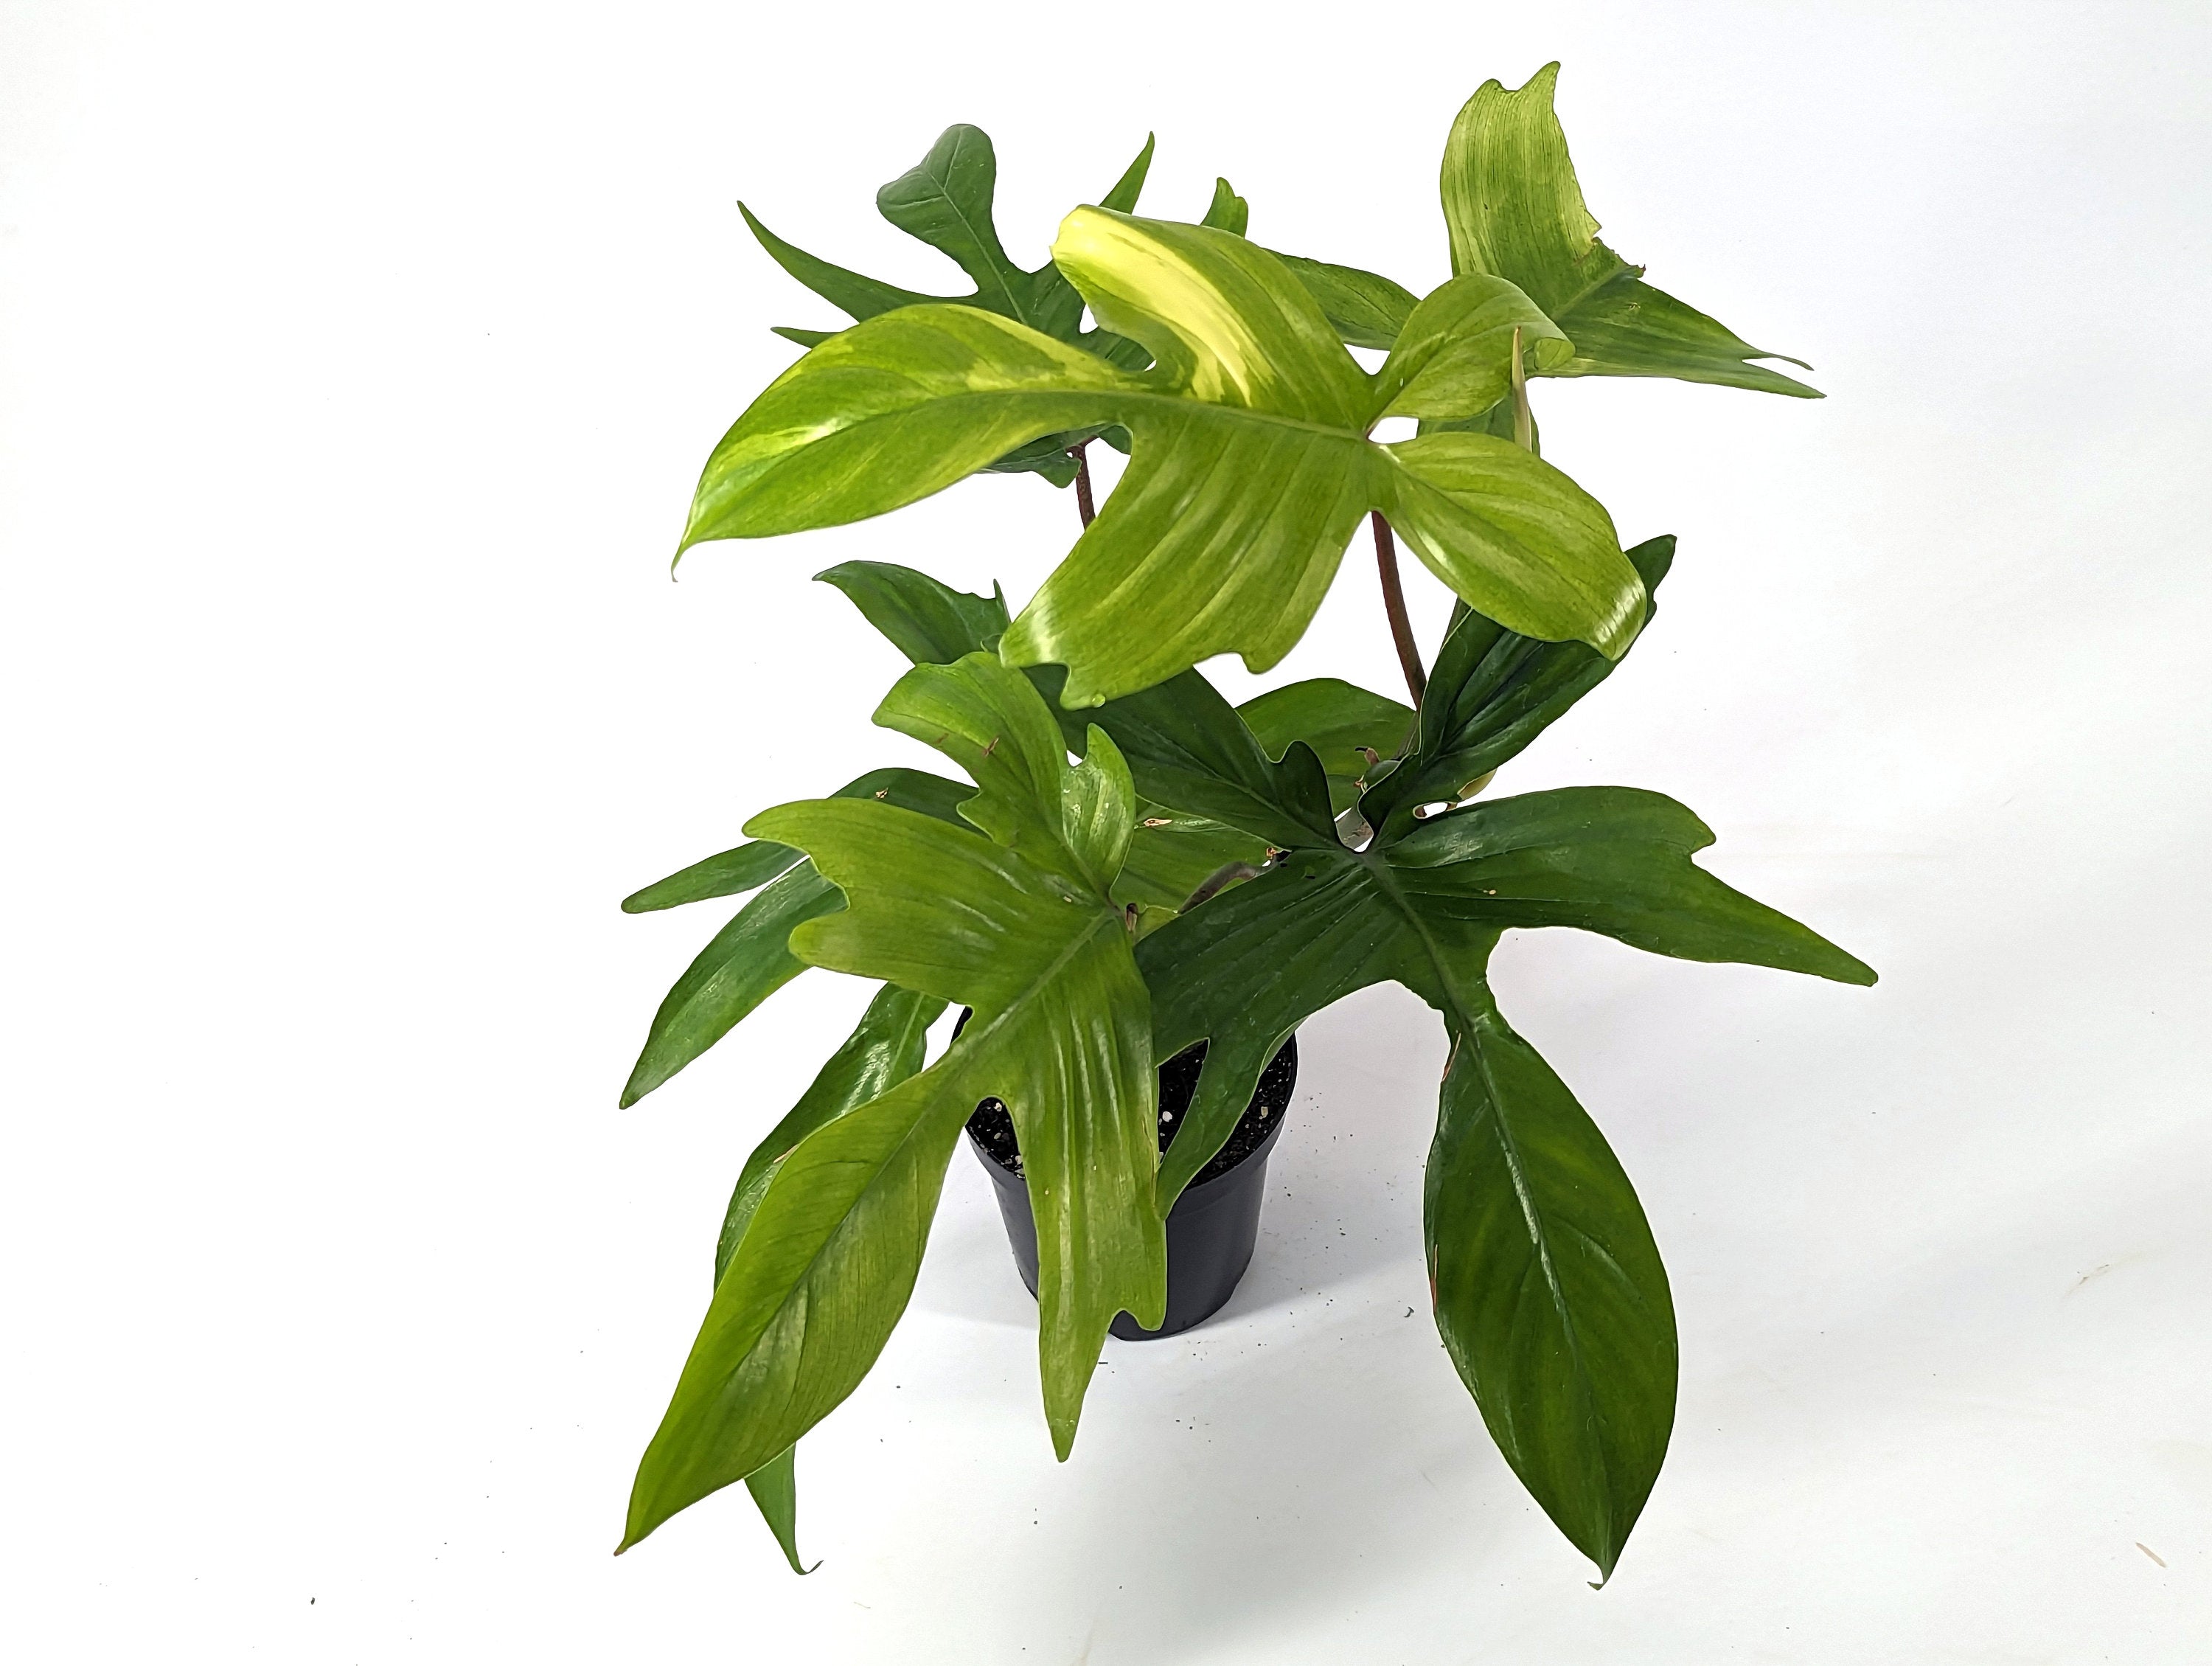 Philodendron Florida Ghost Mint - Large Rooted Plants in 4 Inch Pots